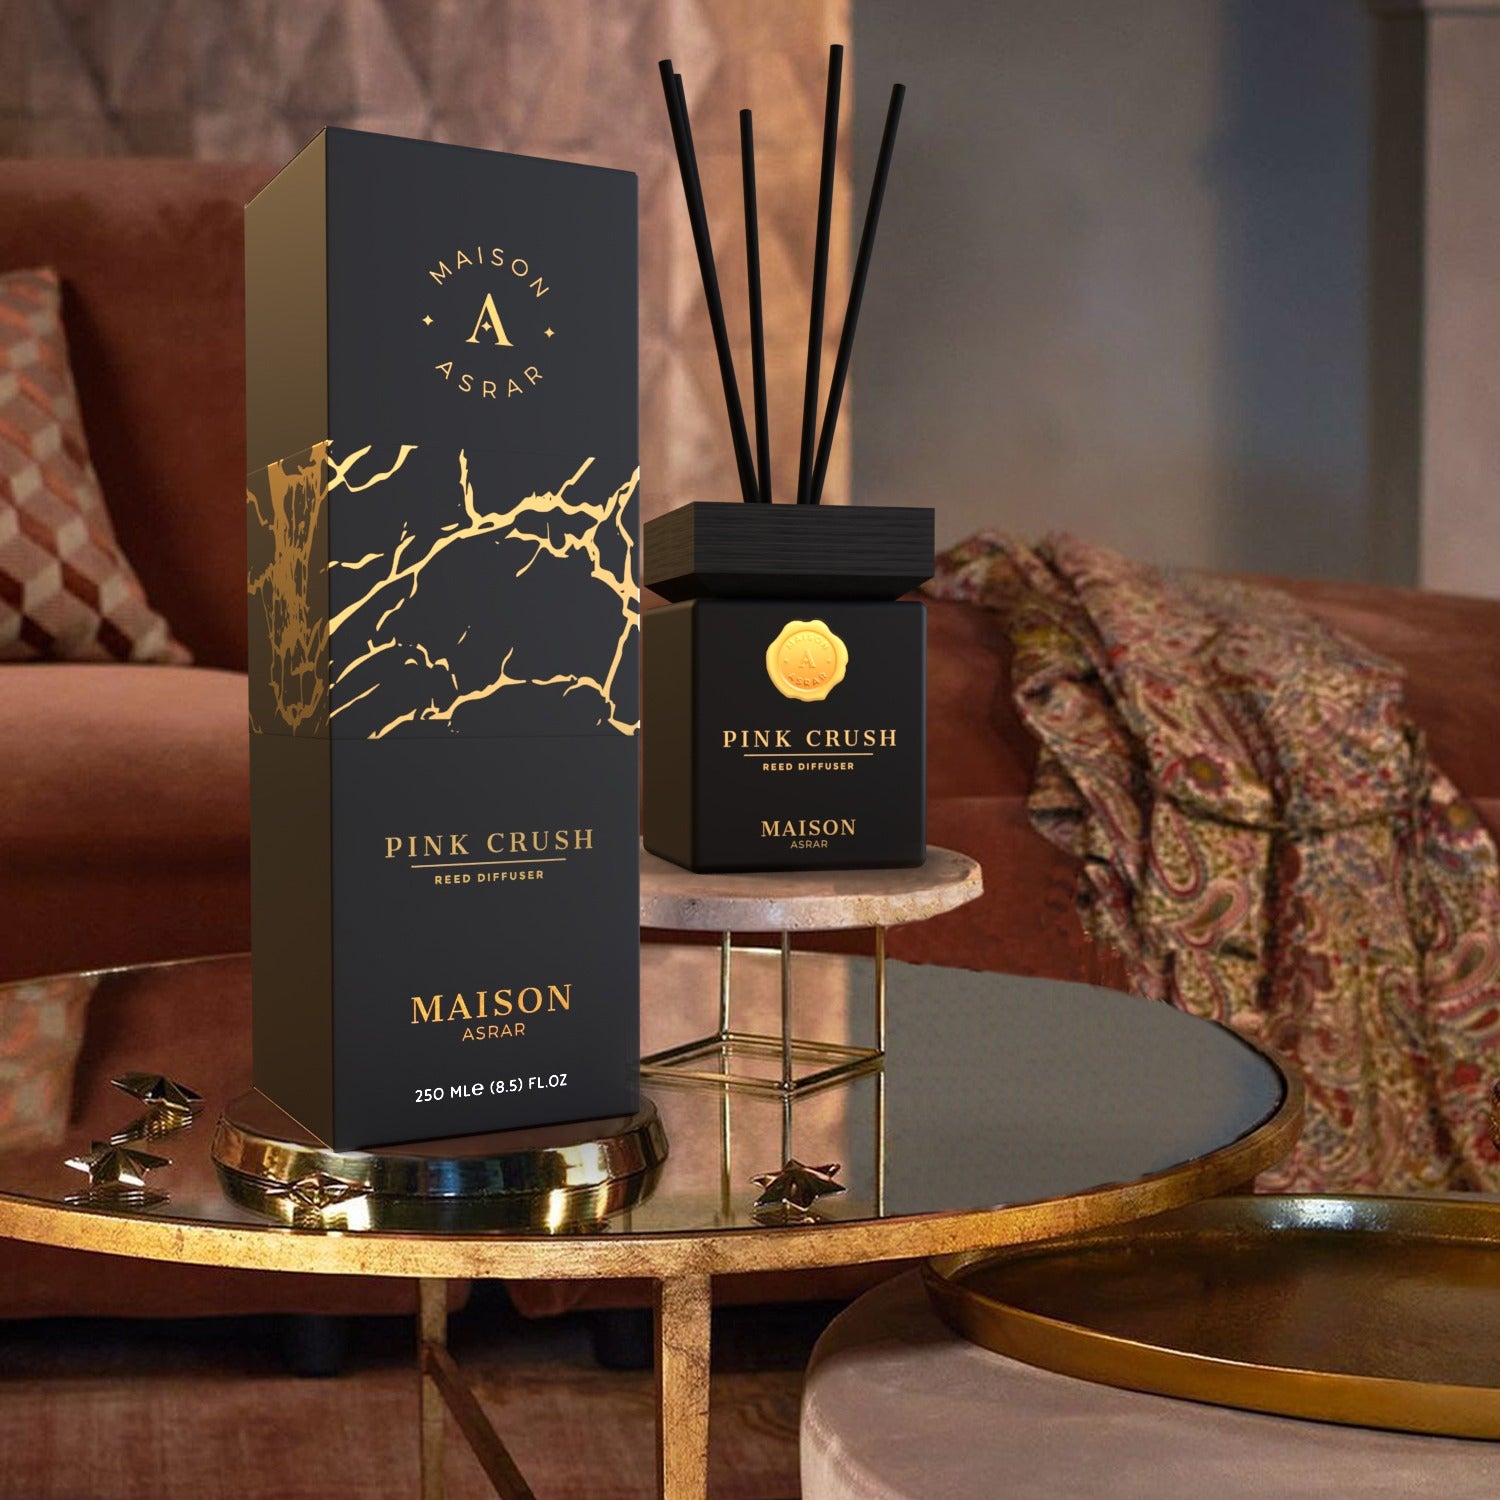 "Introducing Maison Asrar Reed Diffusers: How to Use Them to Freshen Up Your Home"